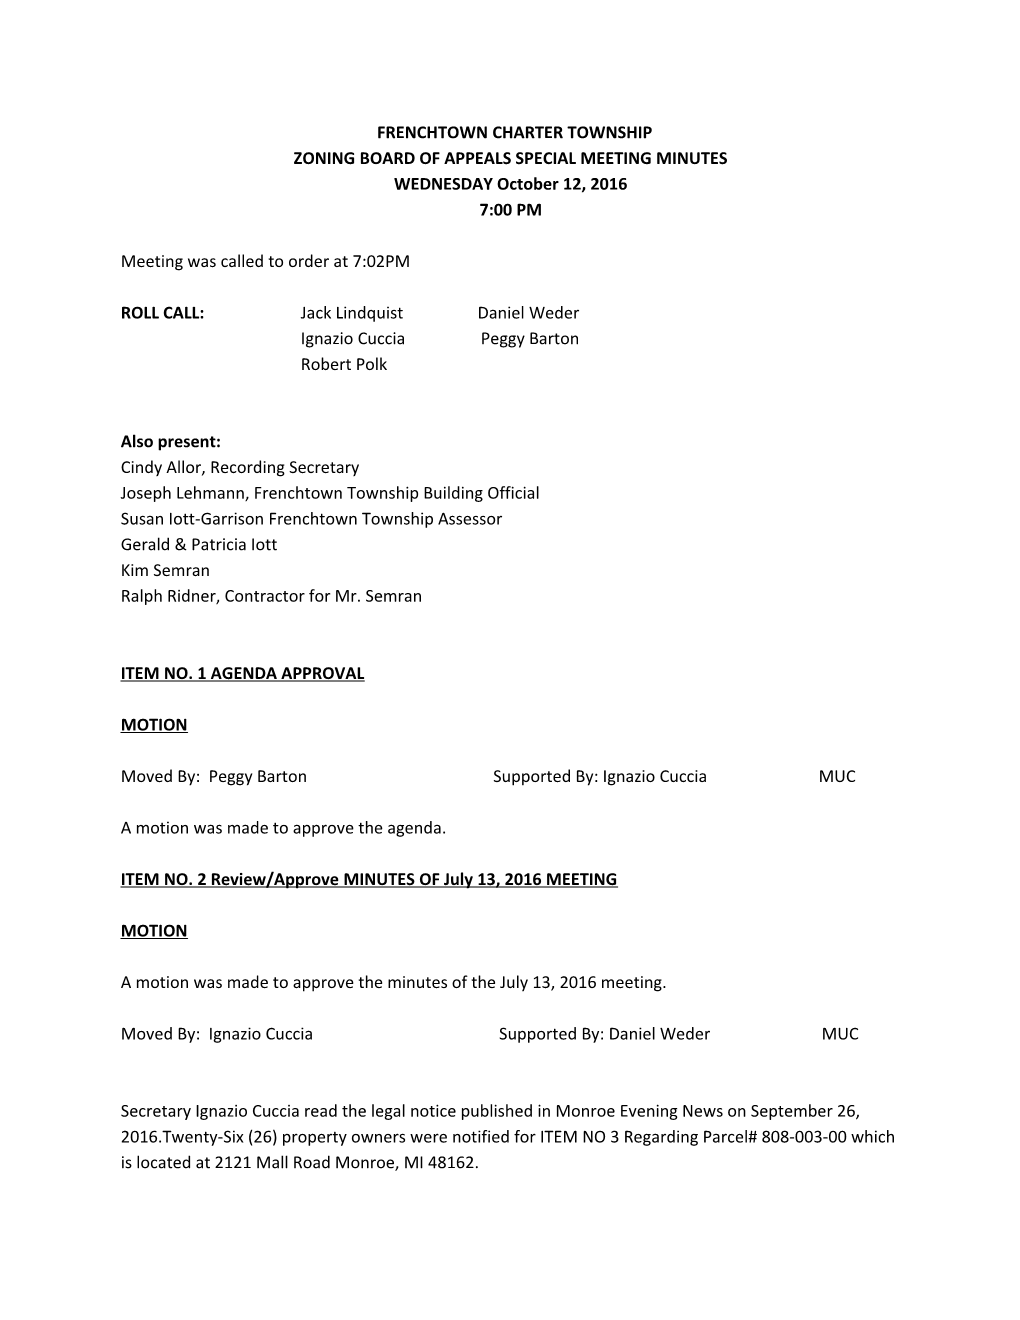 Zoning Board of Appeals Special Meeting Minutes